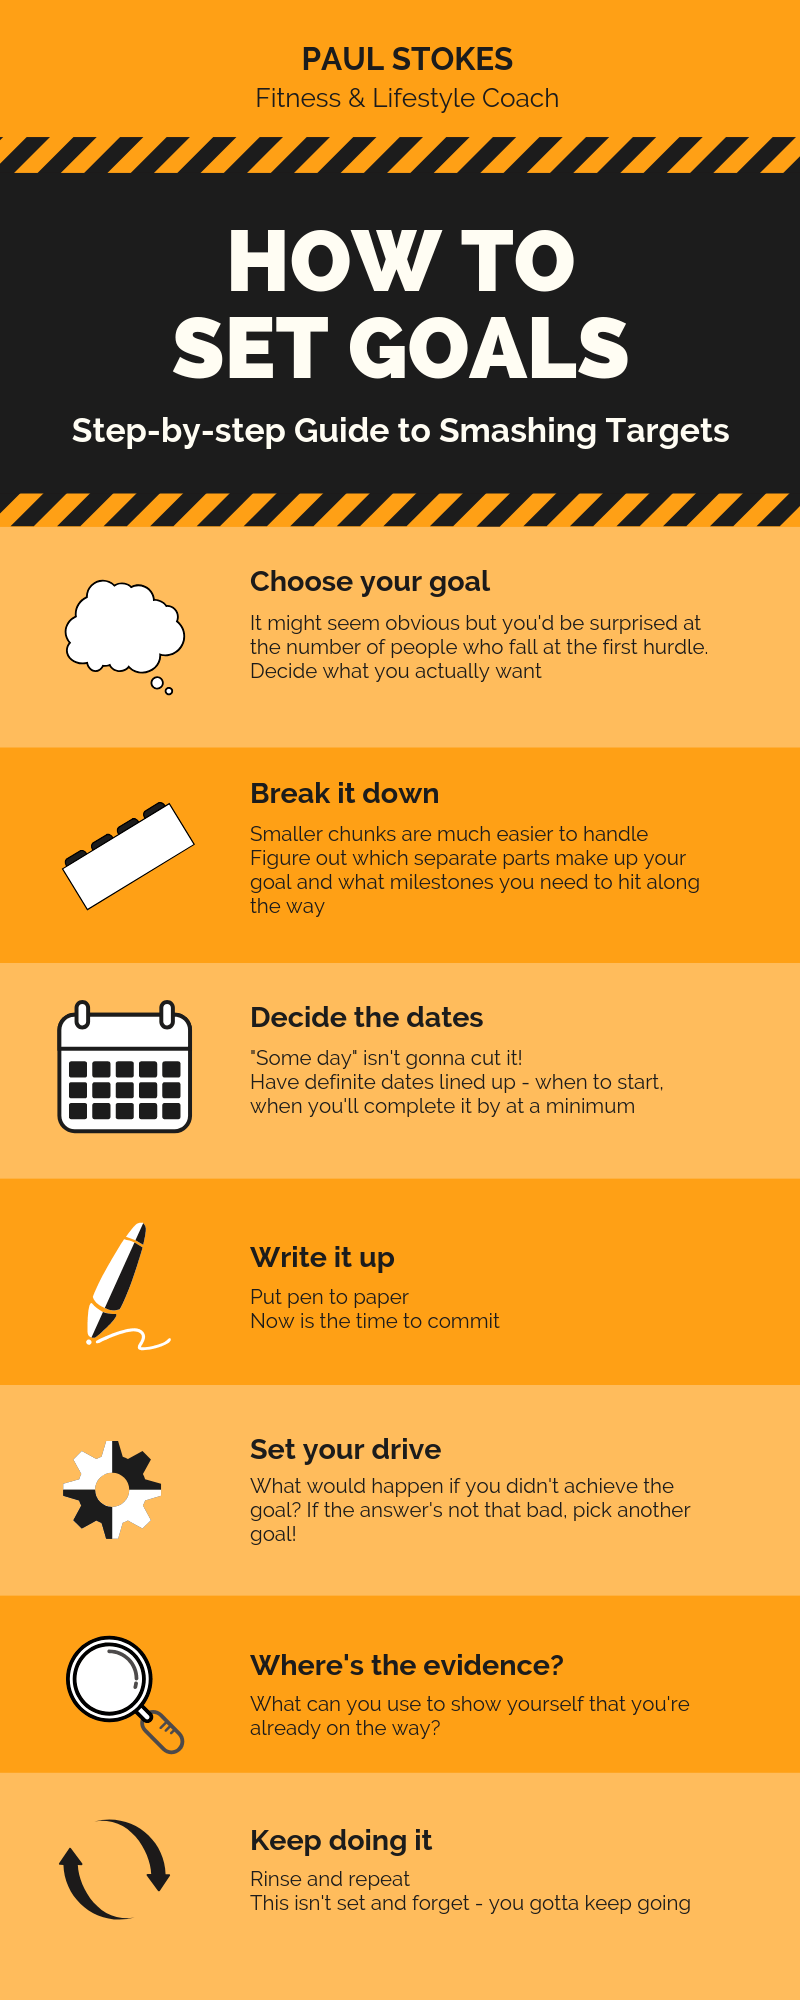 Step-by-step guide to setting and smashing goals infographic